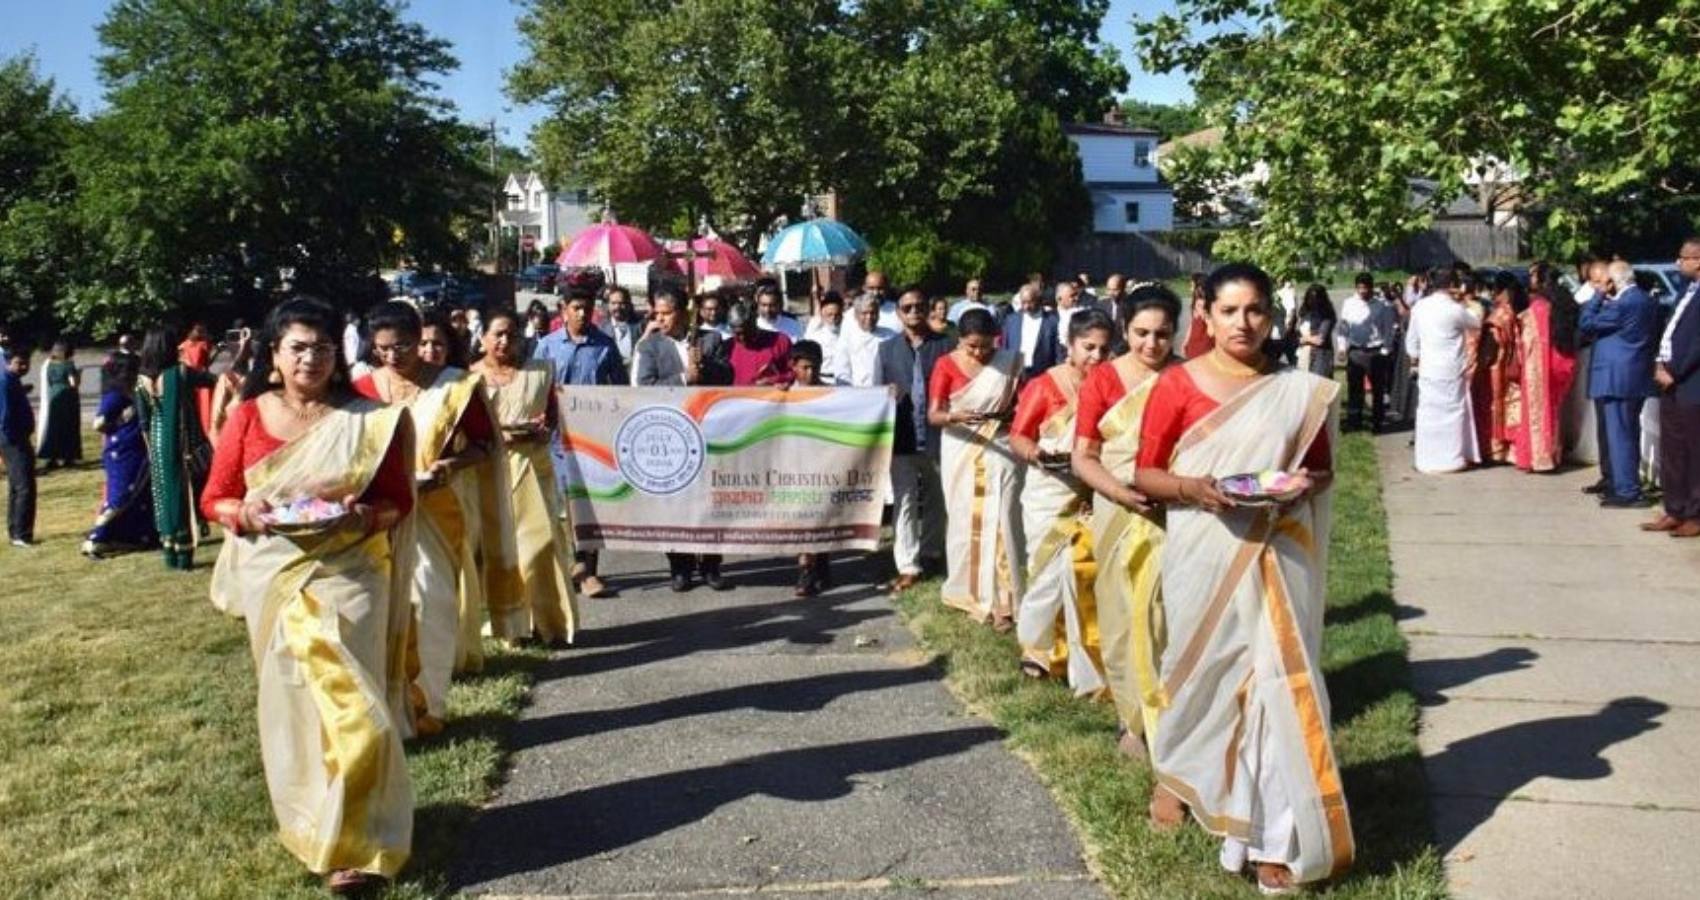 Indian Christian Day: A Day Of Unity And Spirit To Celebrate Indian Christian Heritage